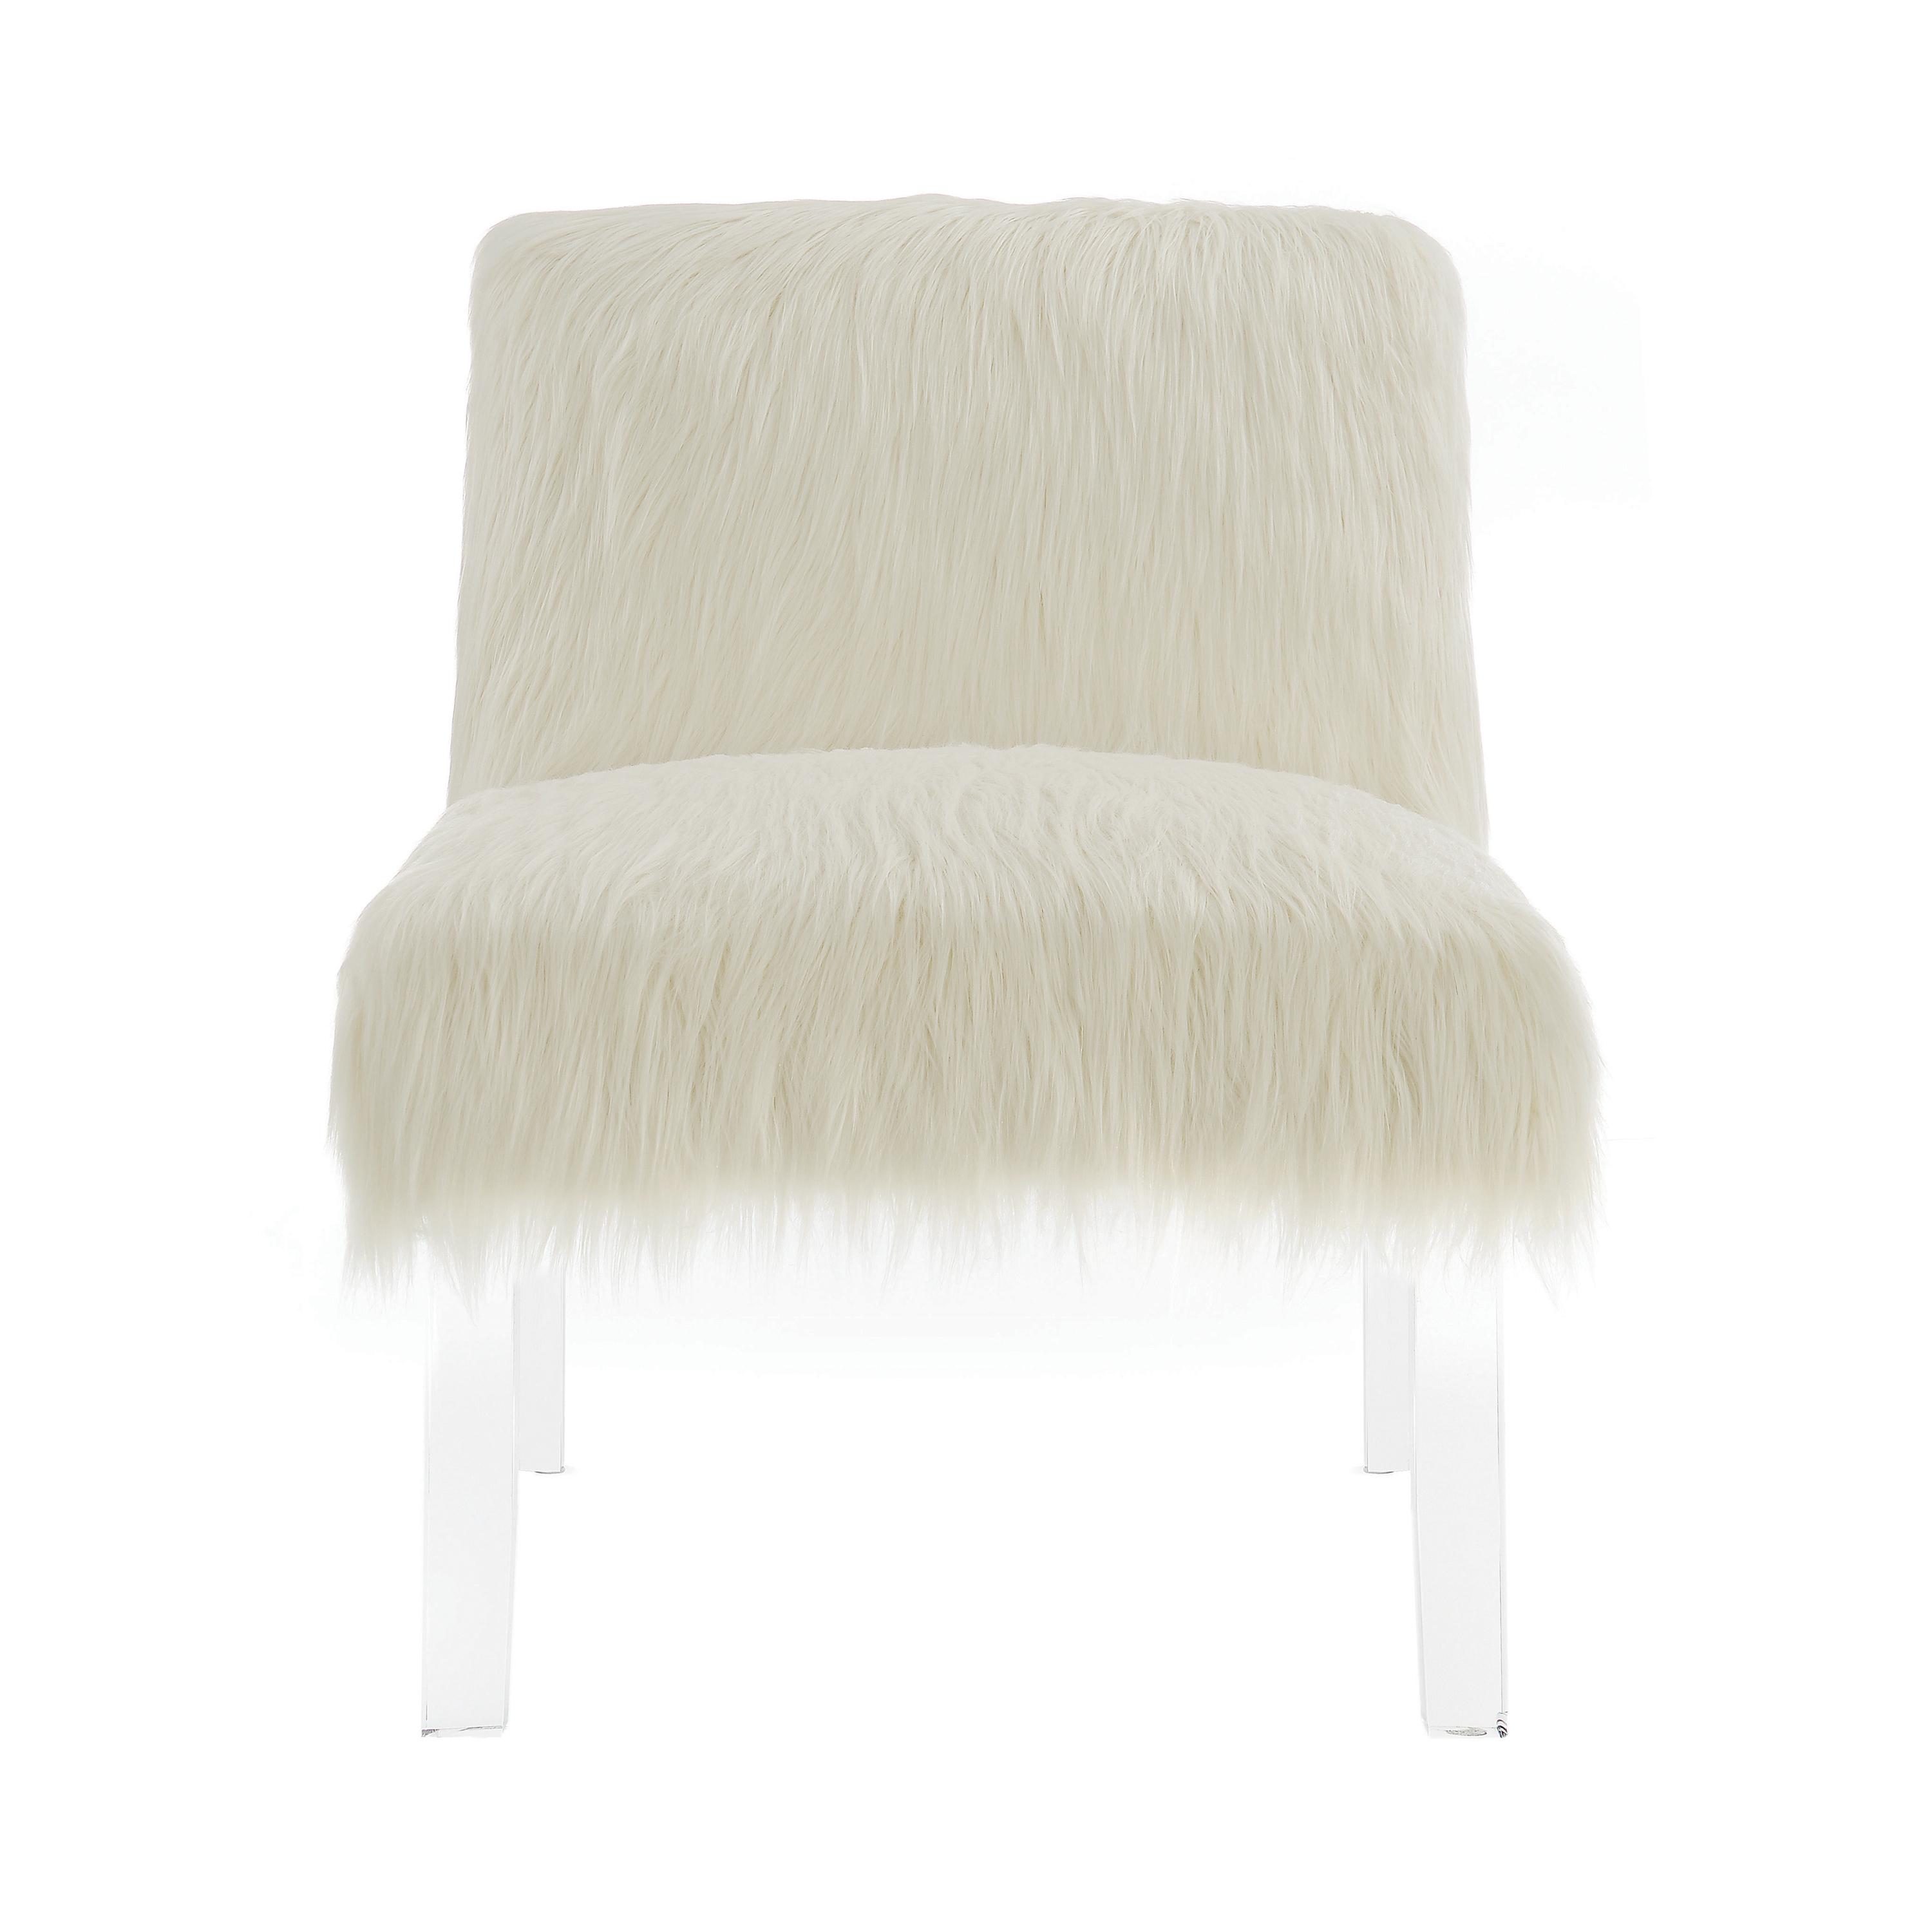 Modern Accent Chair 904059 904059 in White 